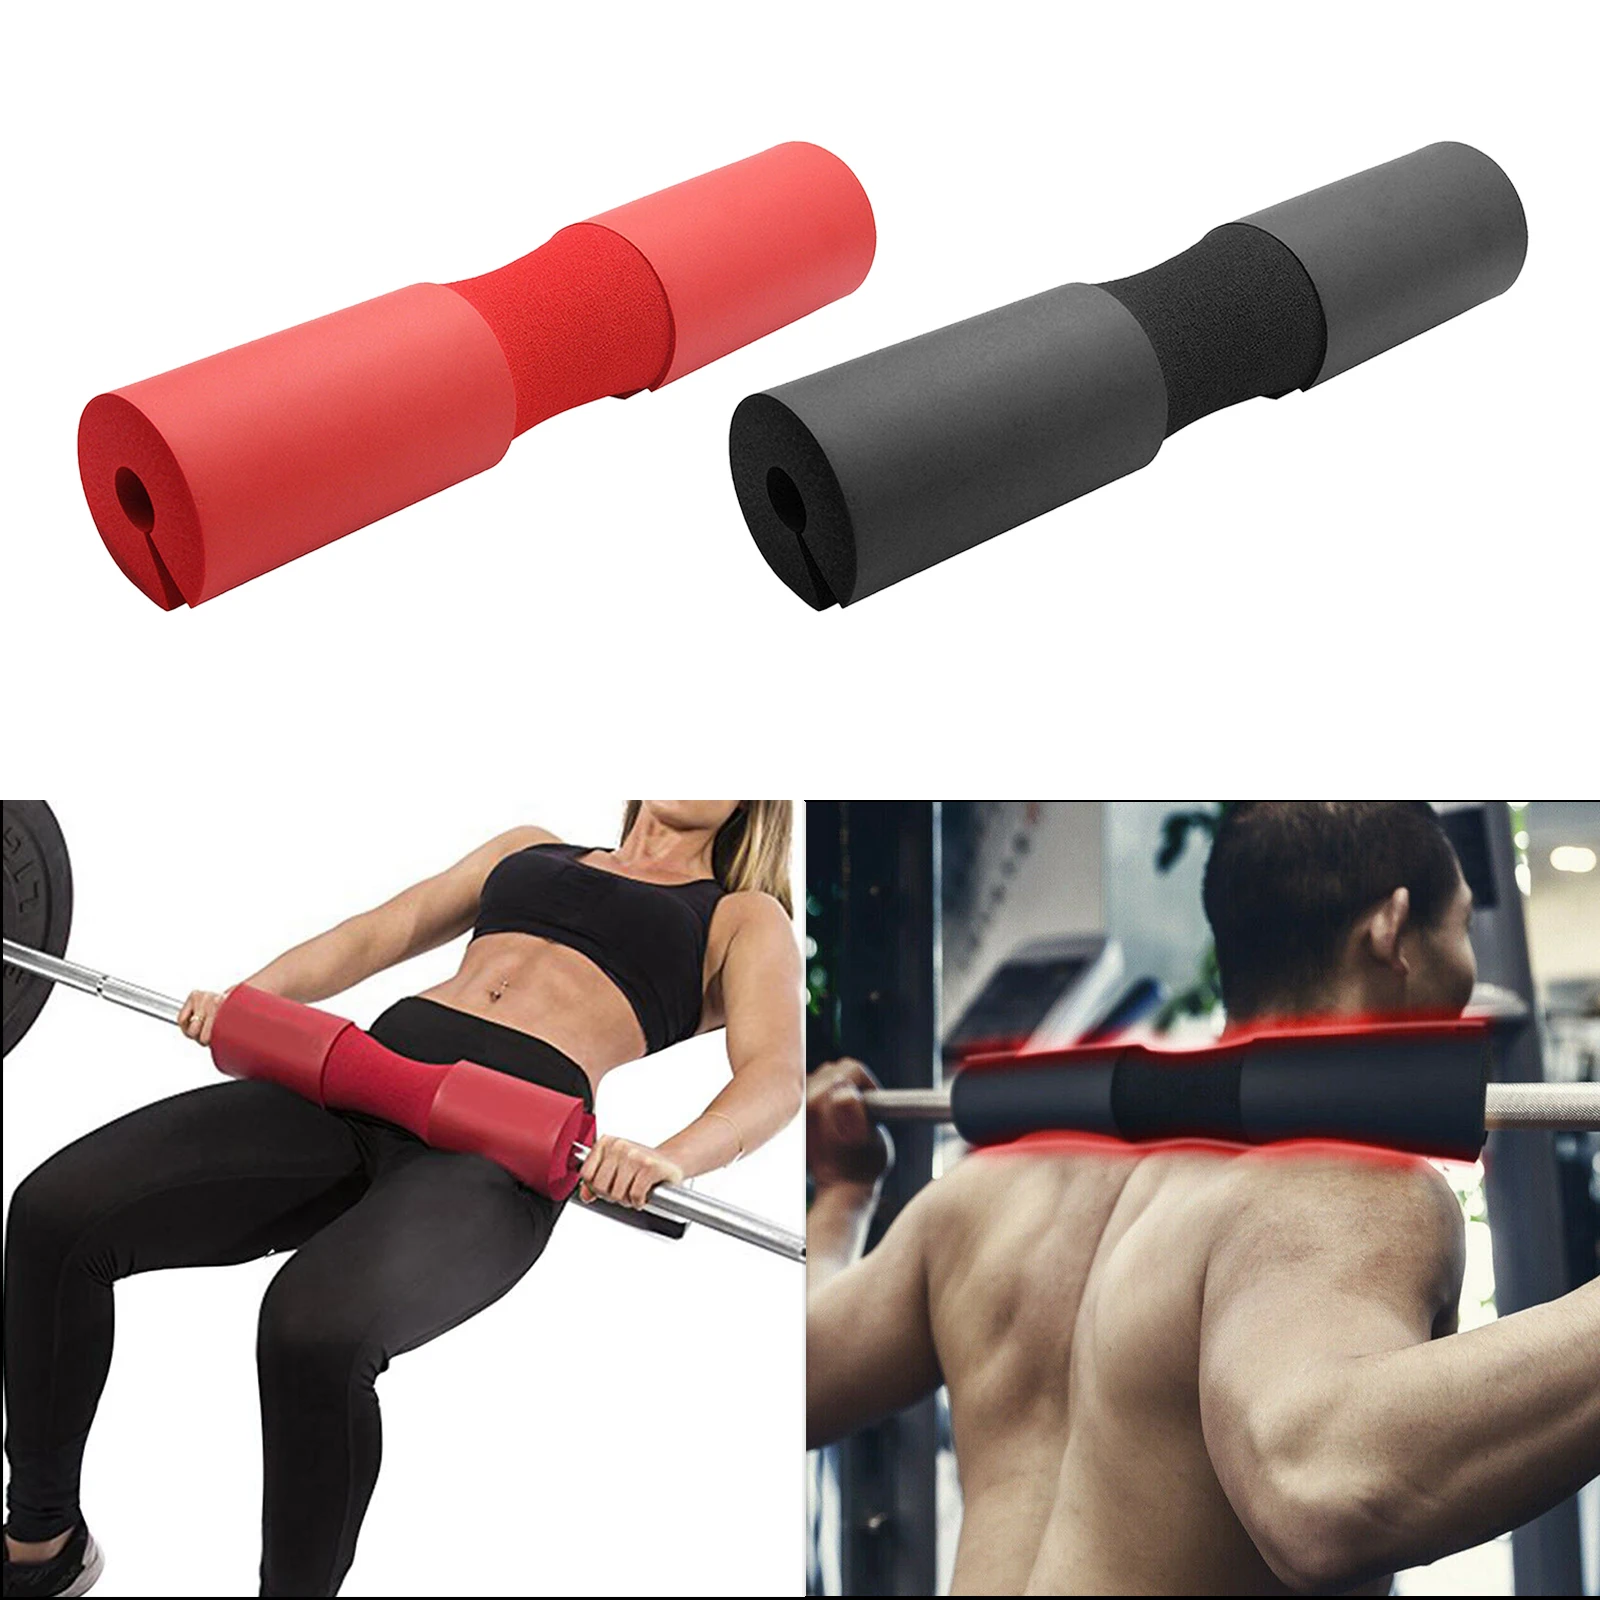 Barbell Squat Pad Squat Bar Pads Neck Shoulder Protection Pads Anti-slip Weight Lifting Fitmess Shoulder Cover Accessories